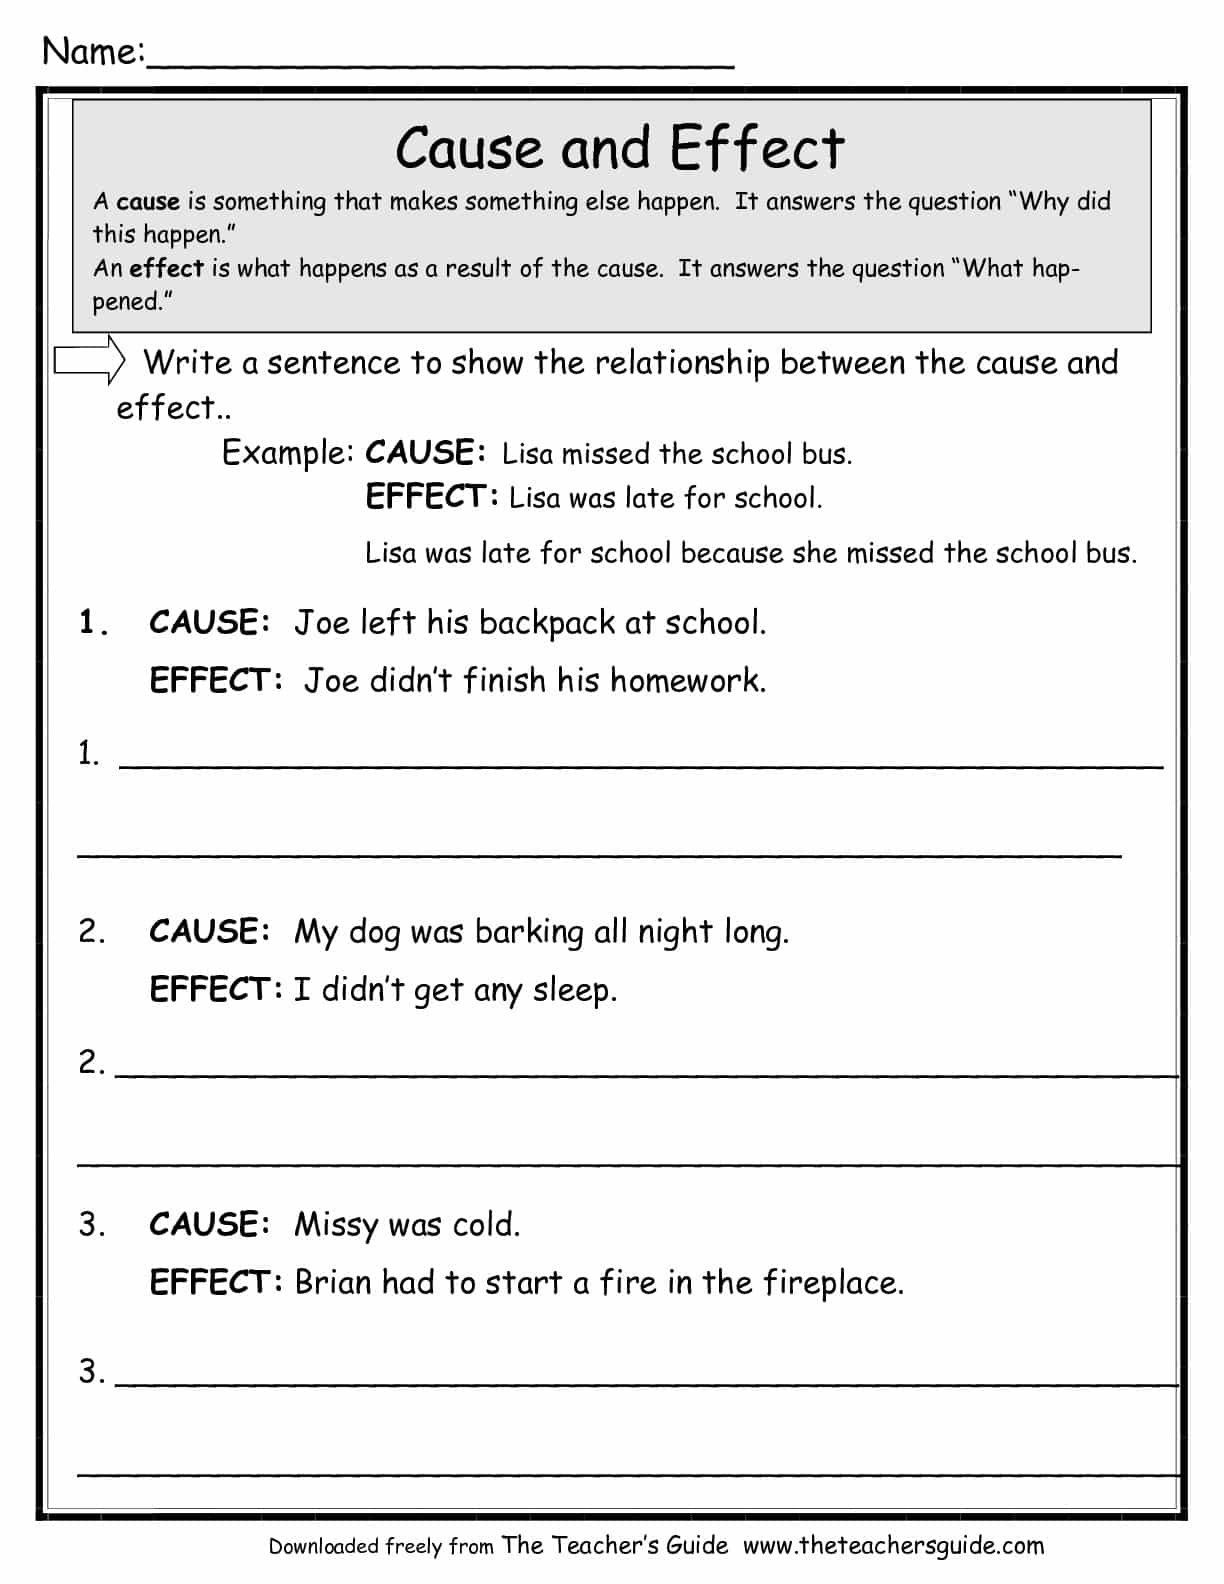 Free printable second grade reading comprehension sheets and free printable reading comprehension packets